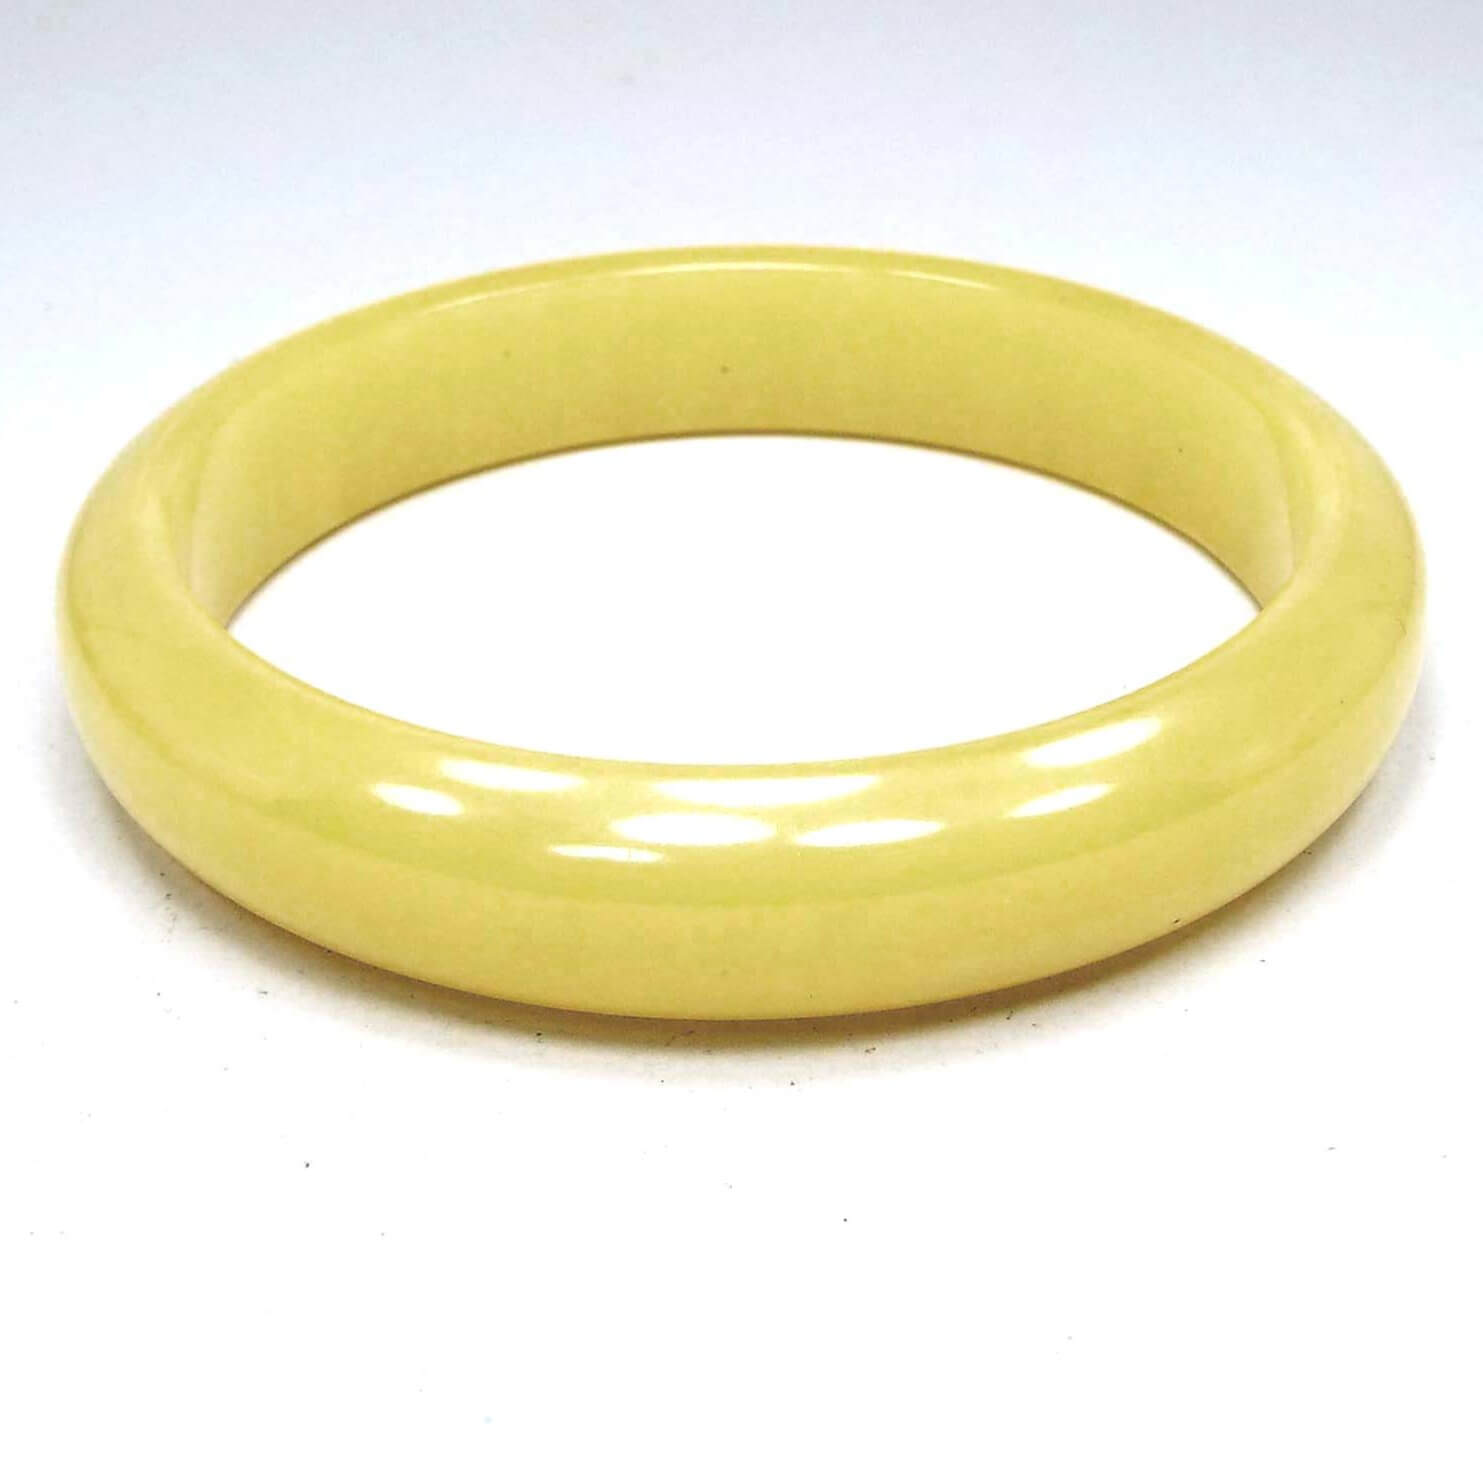 Angled view of the 1950's Mid Century vintage Bakelite bangle bracelet. It is a light yellow in color and has a rounded edge. The inside edge is flat and smooth.